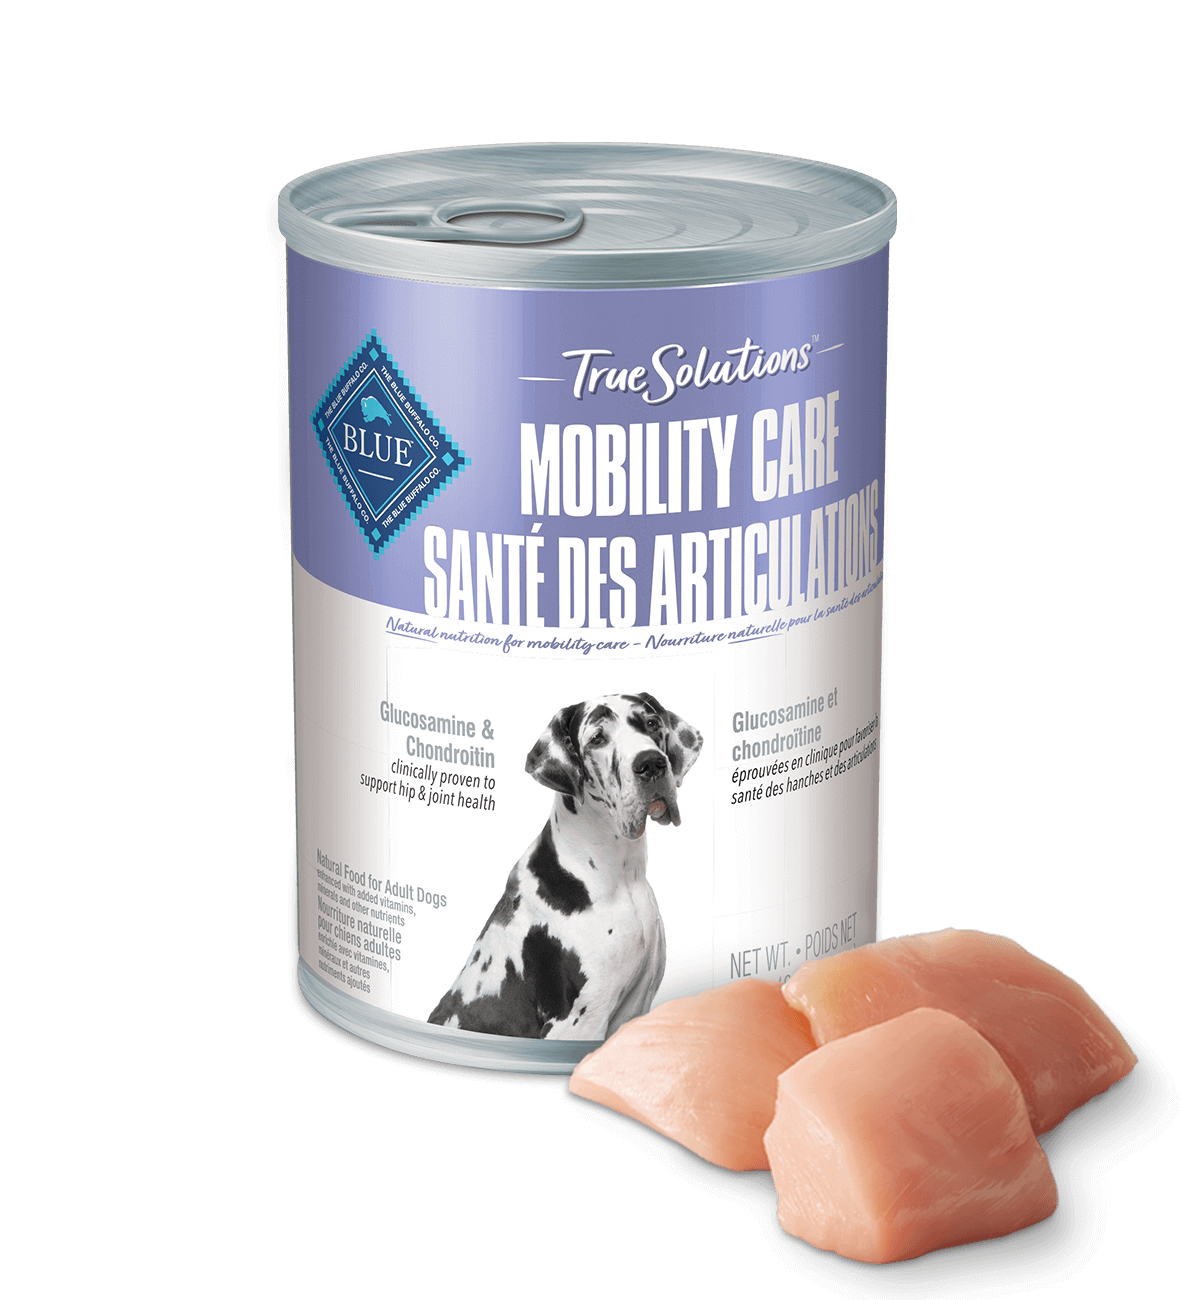 True Solutions Mobility Care Canned dog food